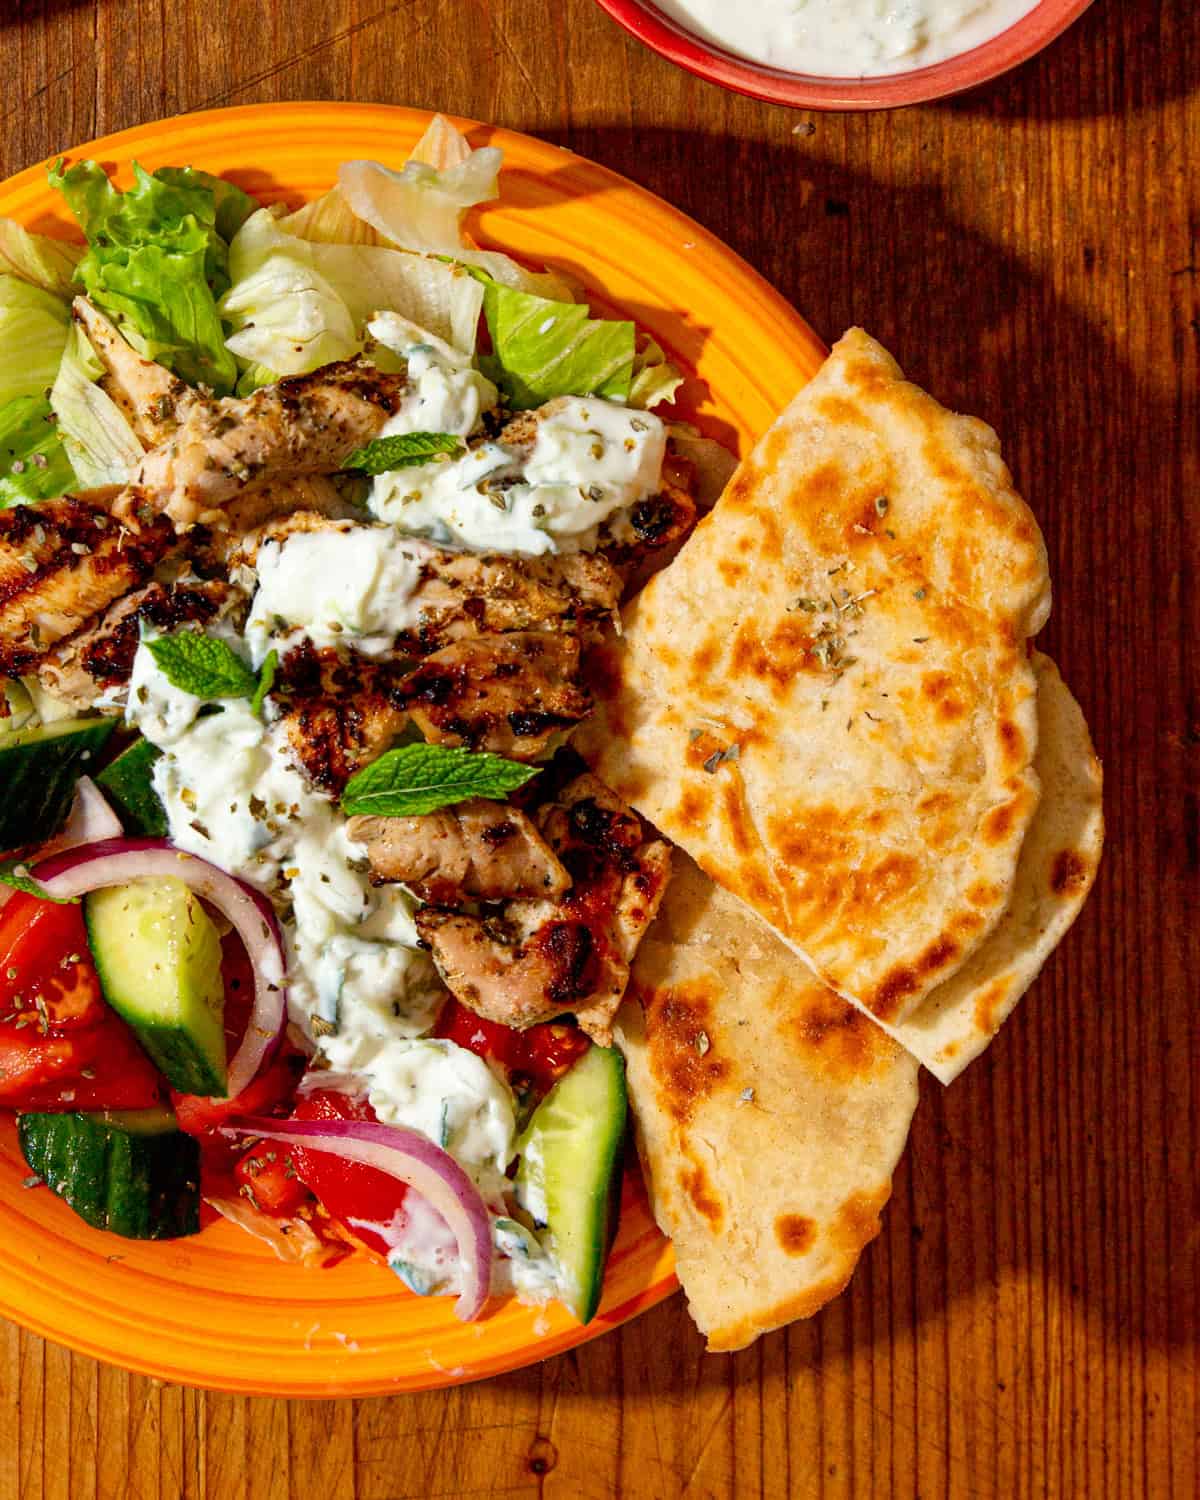 Quarter slices of flatbreads served with a plate of salad and chicken in a yellow bowl on a wooden table.